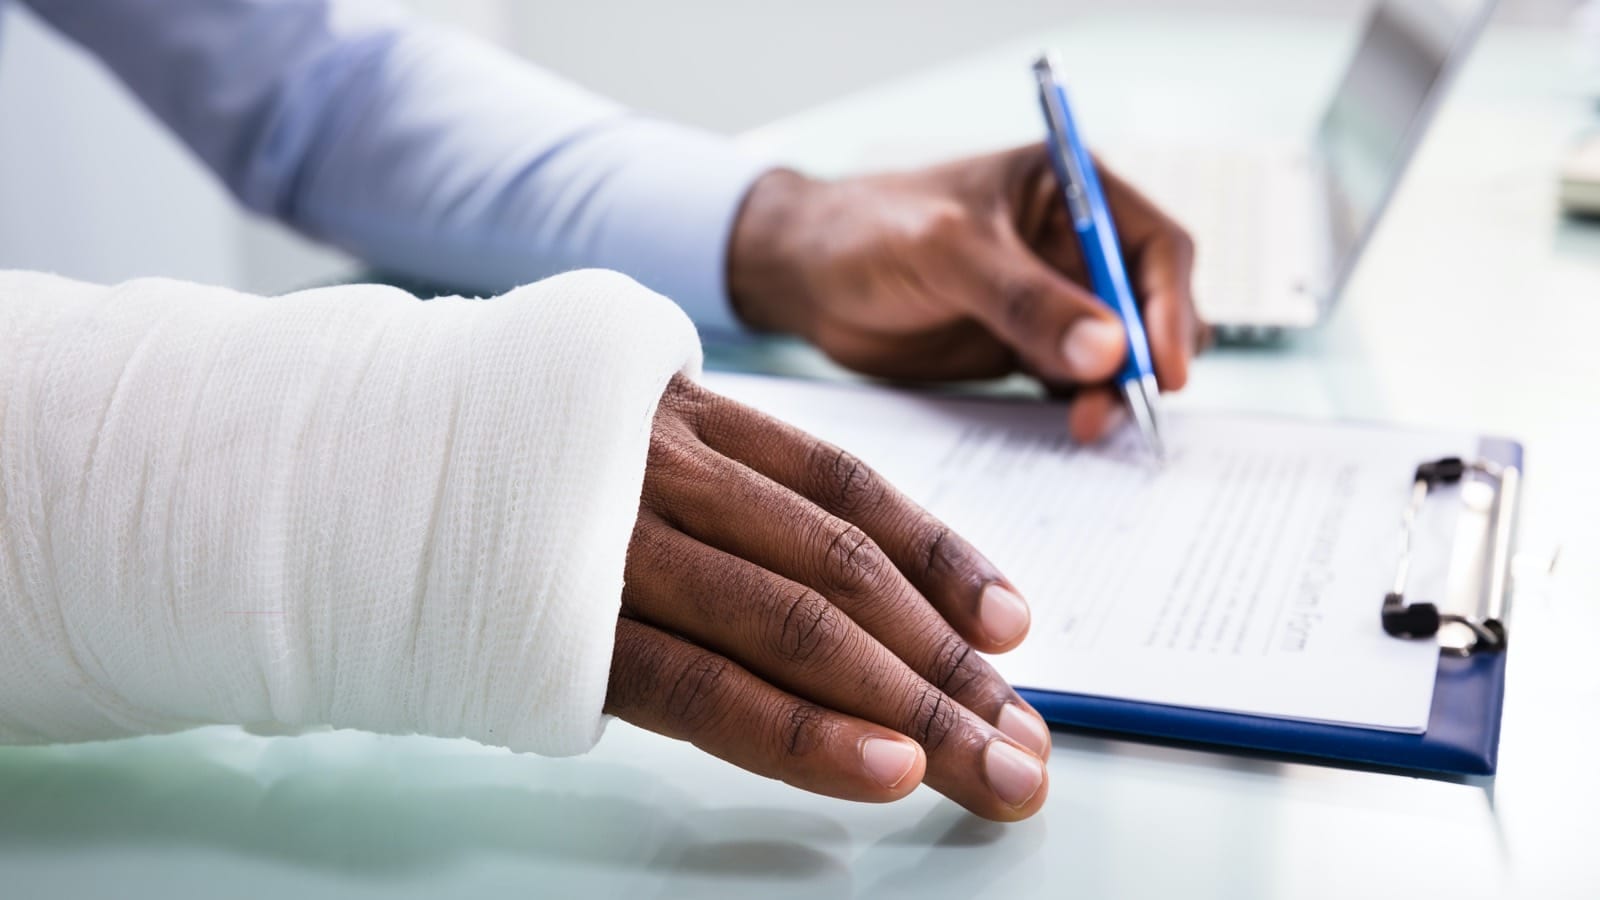 Injured hand signing forms